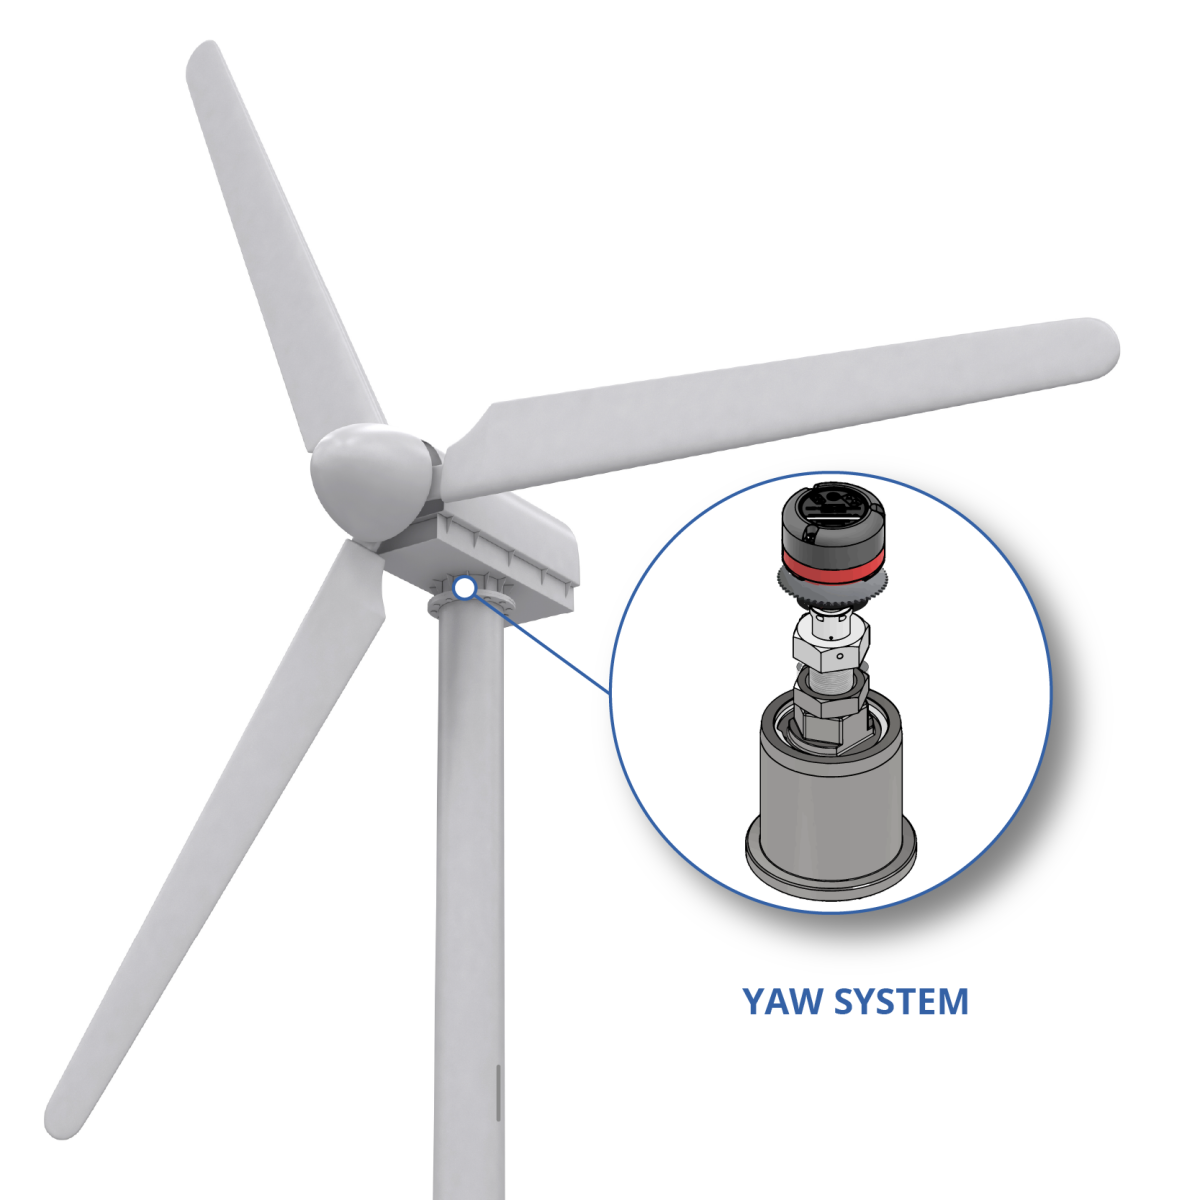 Introducing Compression Based Load Monitoring for Wind Turbines